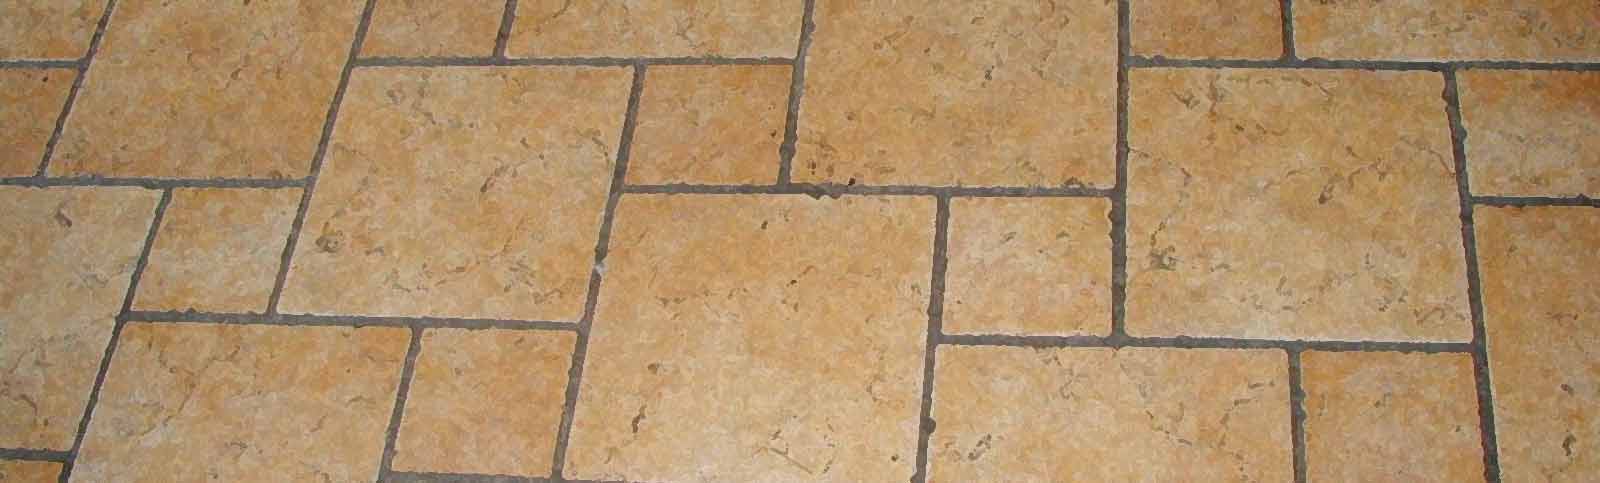 Pros and Cons of Installing Your Own Tiles Vs Hiring Professional Tile Fitter